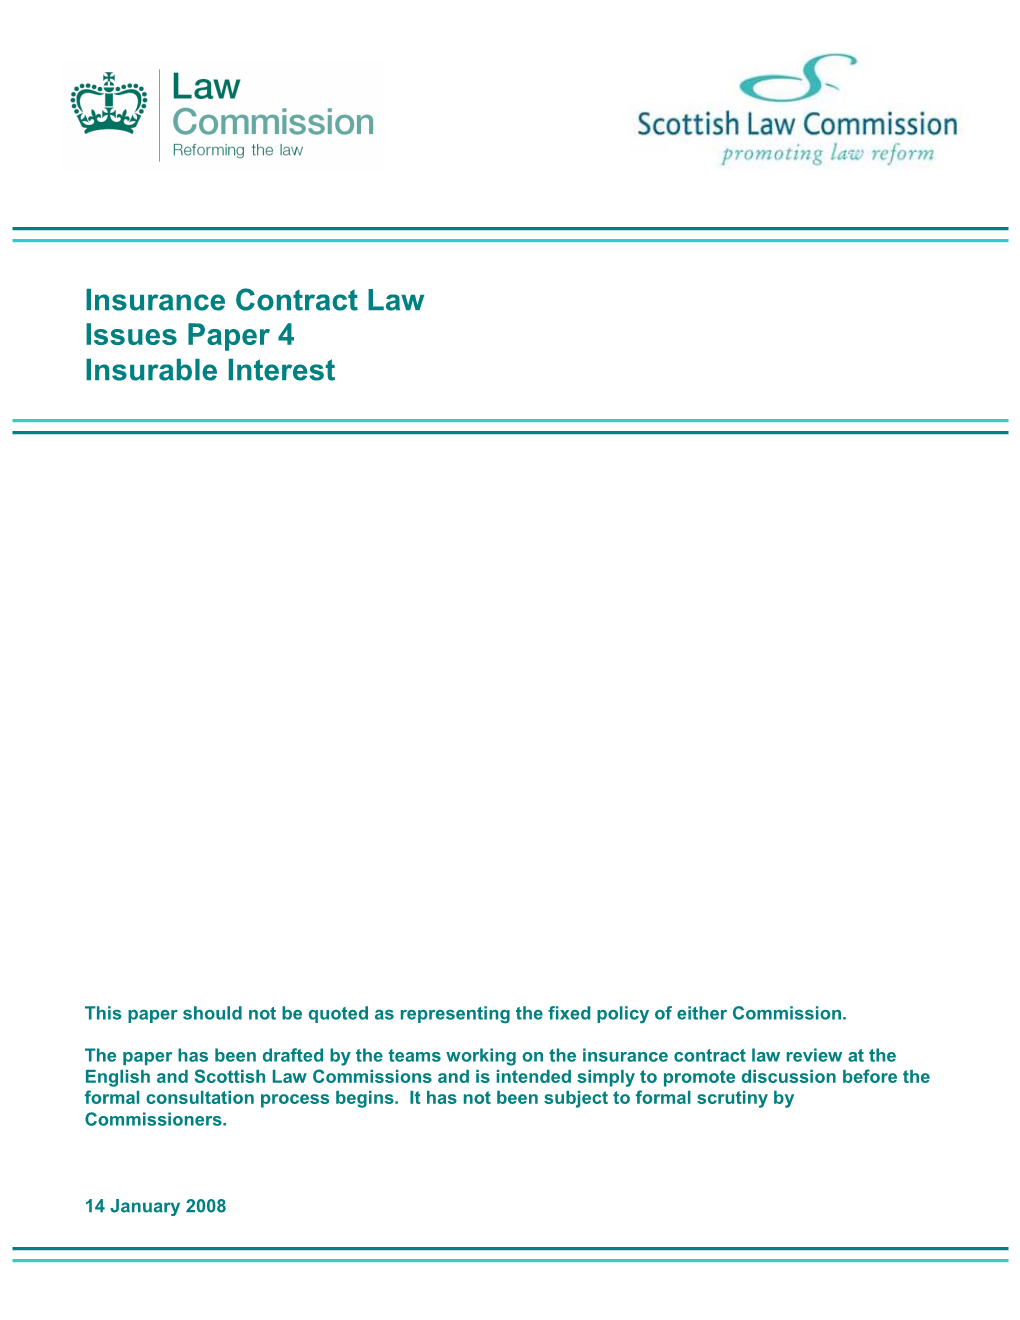 Insurance Contract Law Issues Paper 4: Insurable Interest